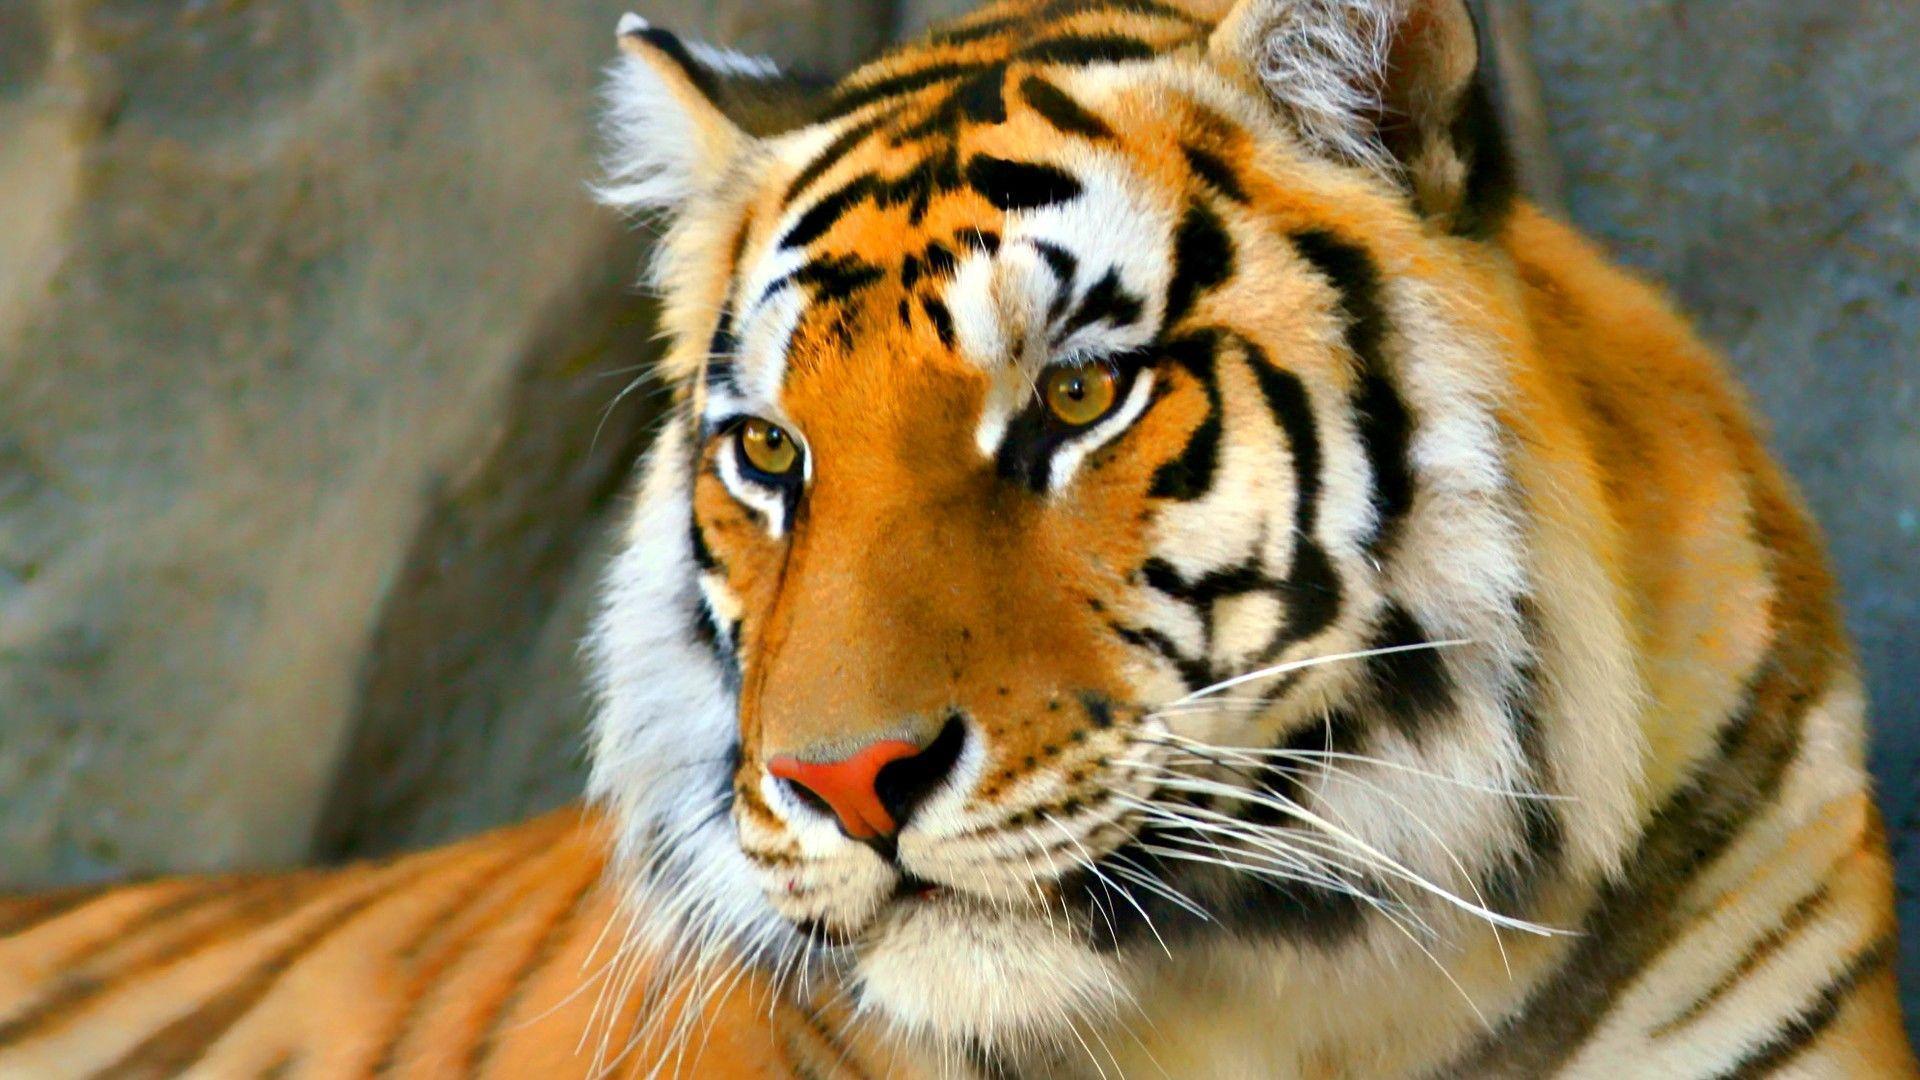 tiger face wallpapers download